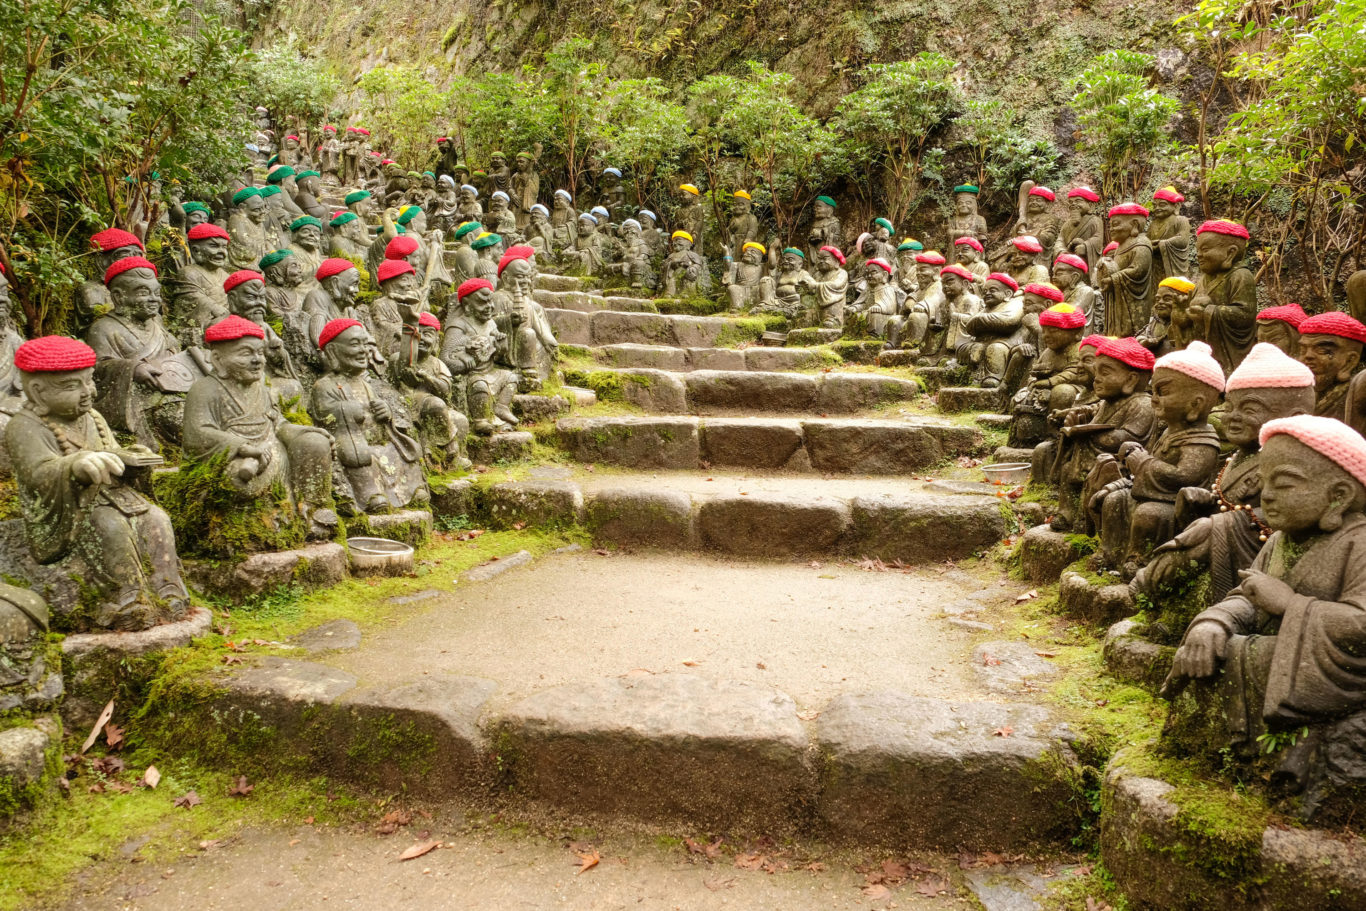 numerous jizo buddha statues, which are regarded as protectors for children and unborn babies